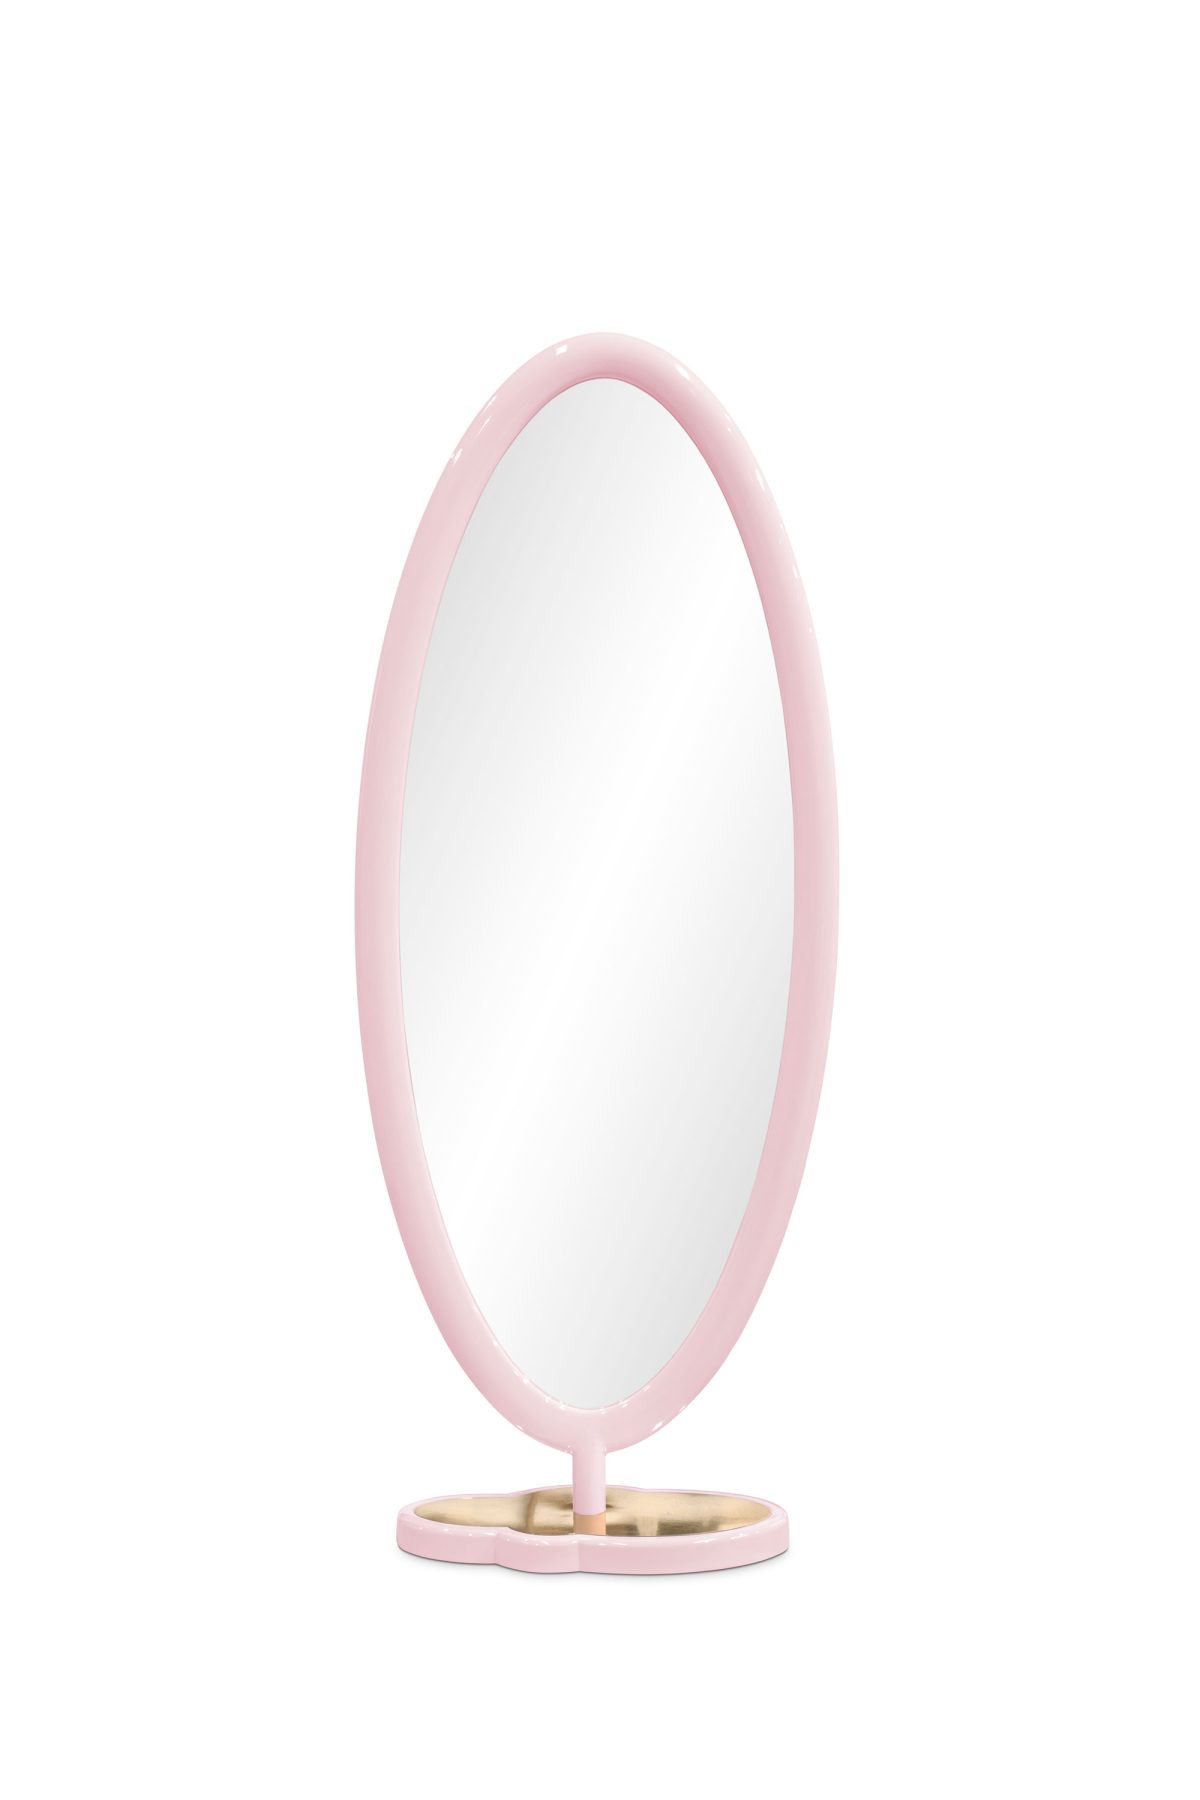 Magnify the beauty of your room with Cloud Mirror!